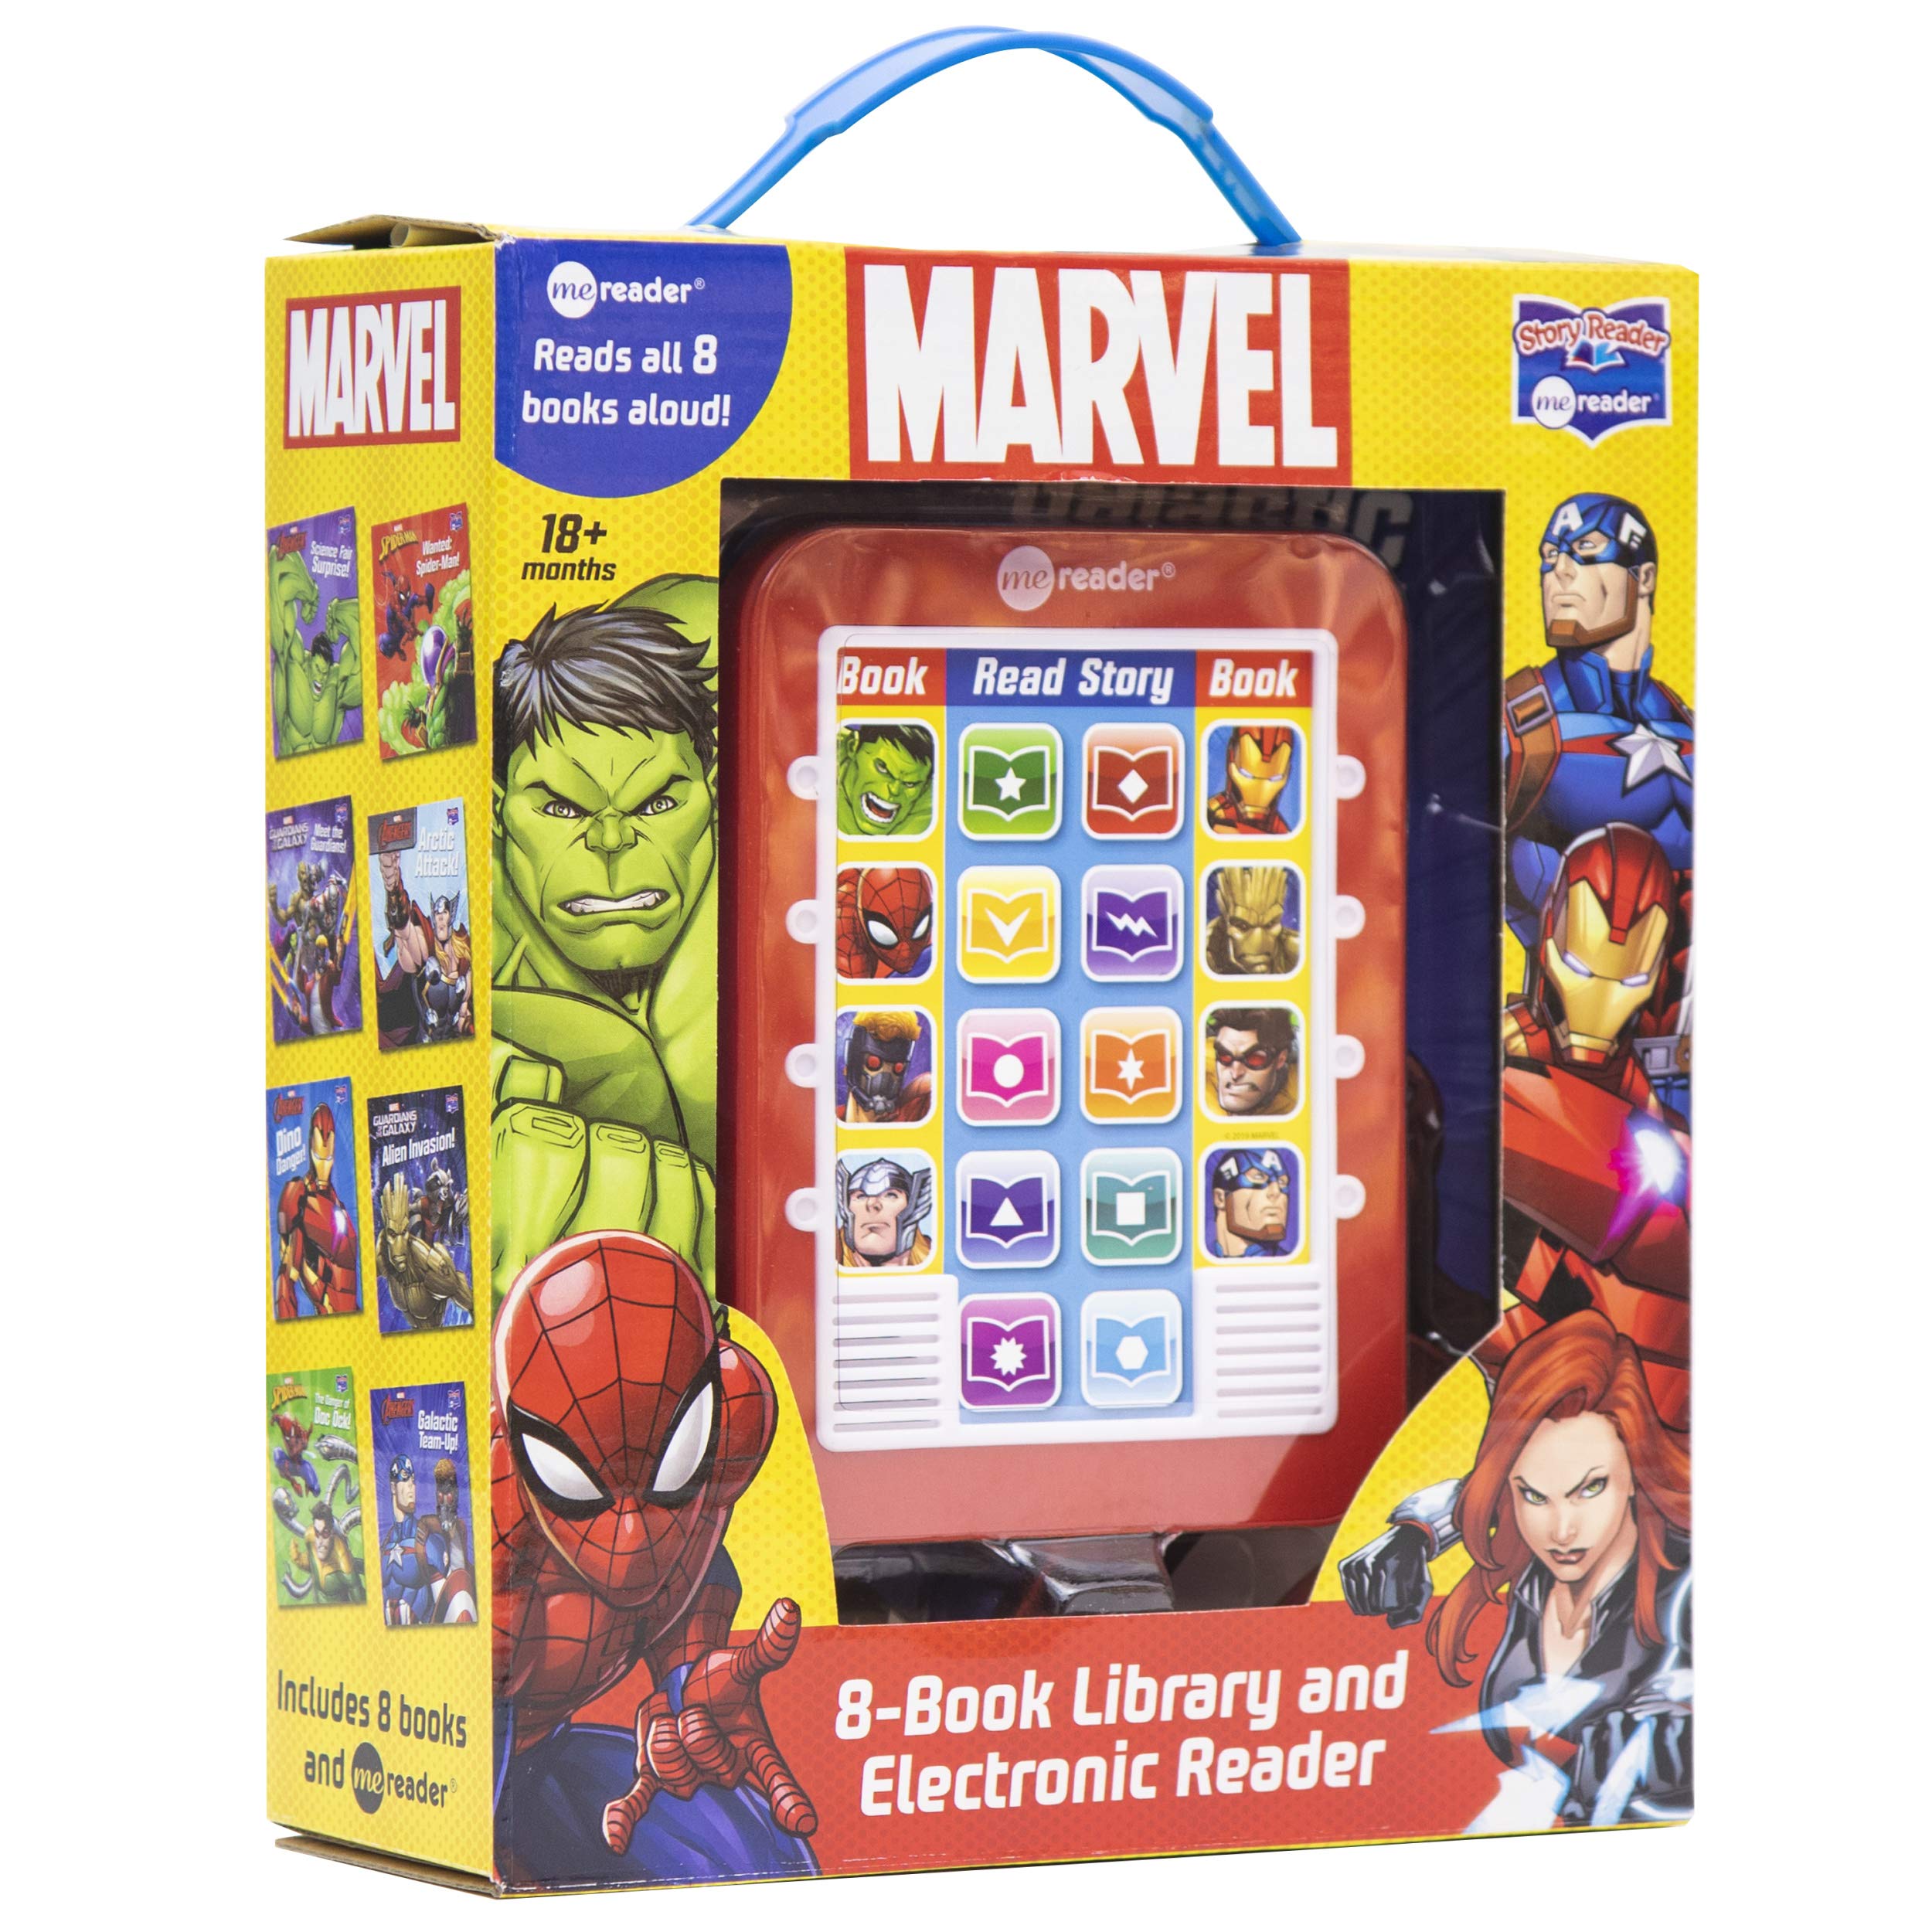 Tales　and　Tall　Super　Me　Avengers,　Spider-man,　and　Marvel　and　More!　Library　Book　Books　Electronic　Heroes　Jr　Find　Look　Sound　Guardians,　Reader